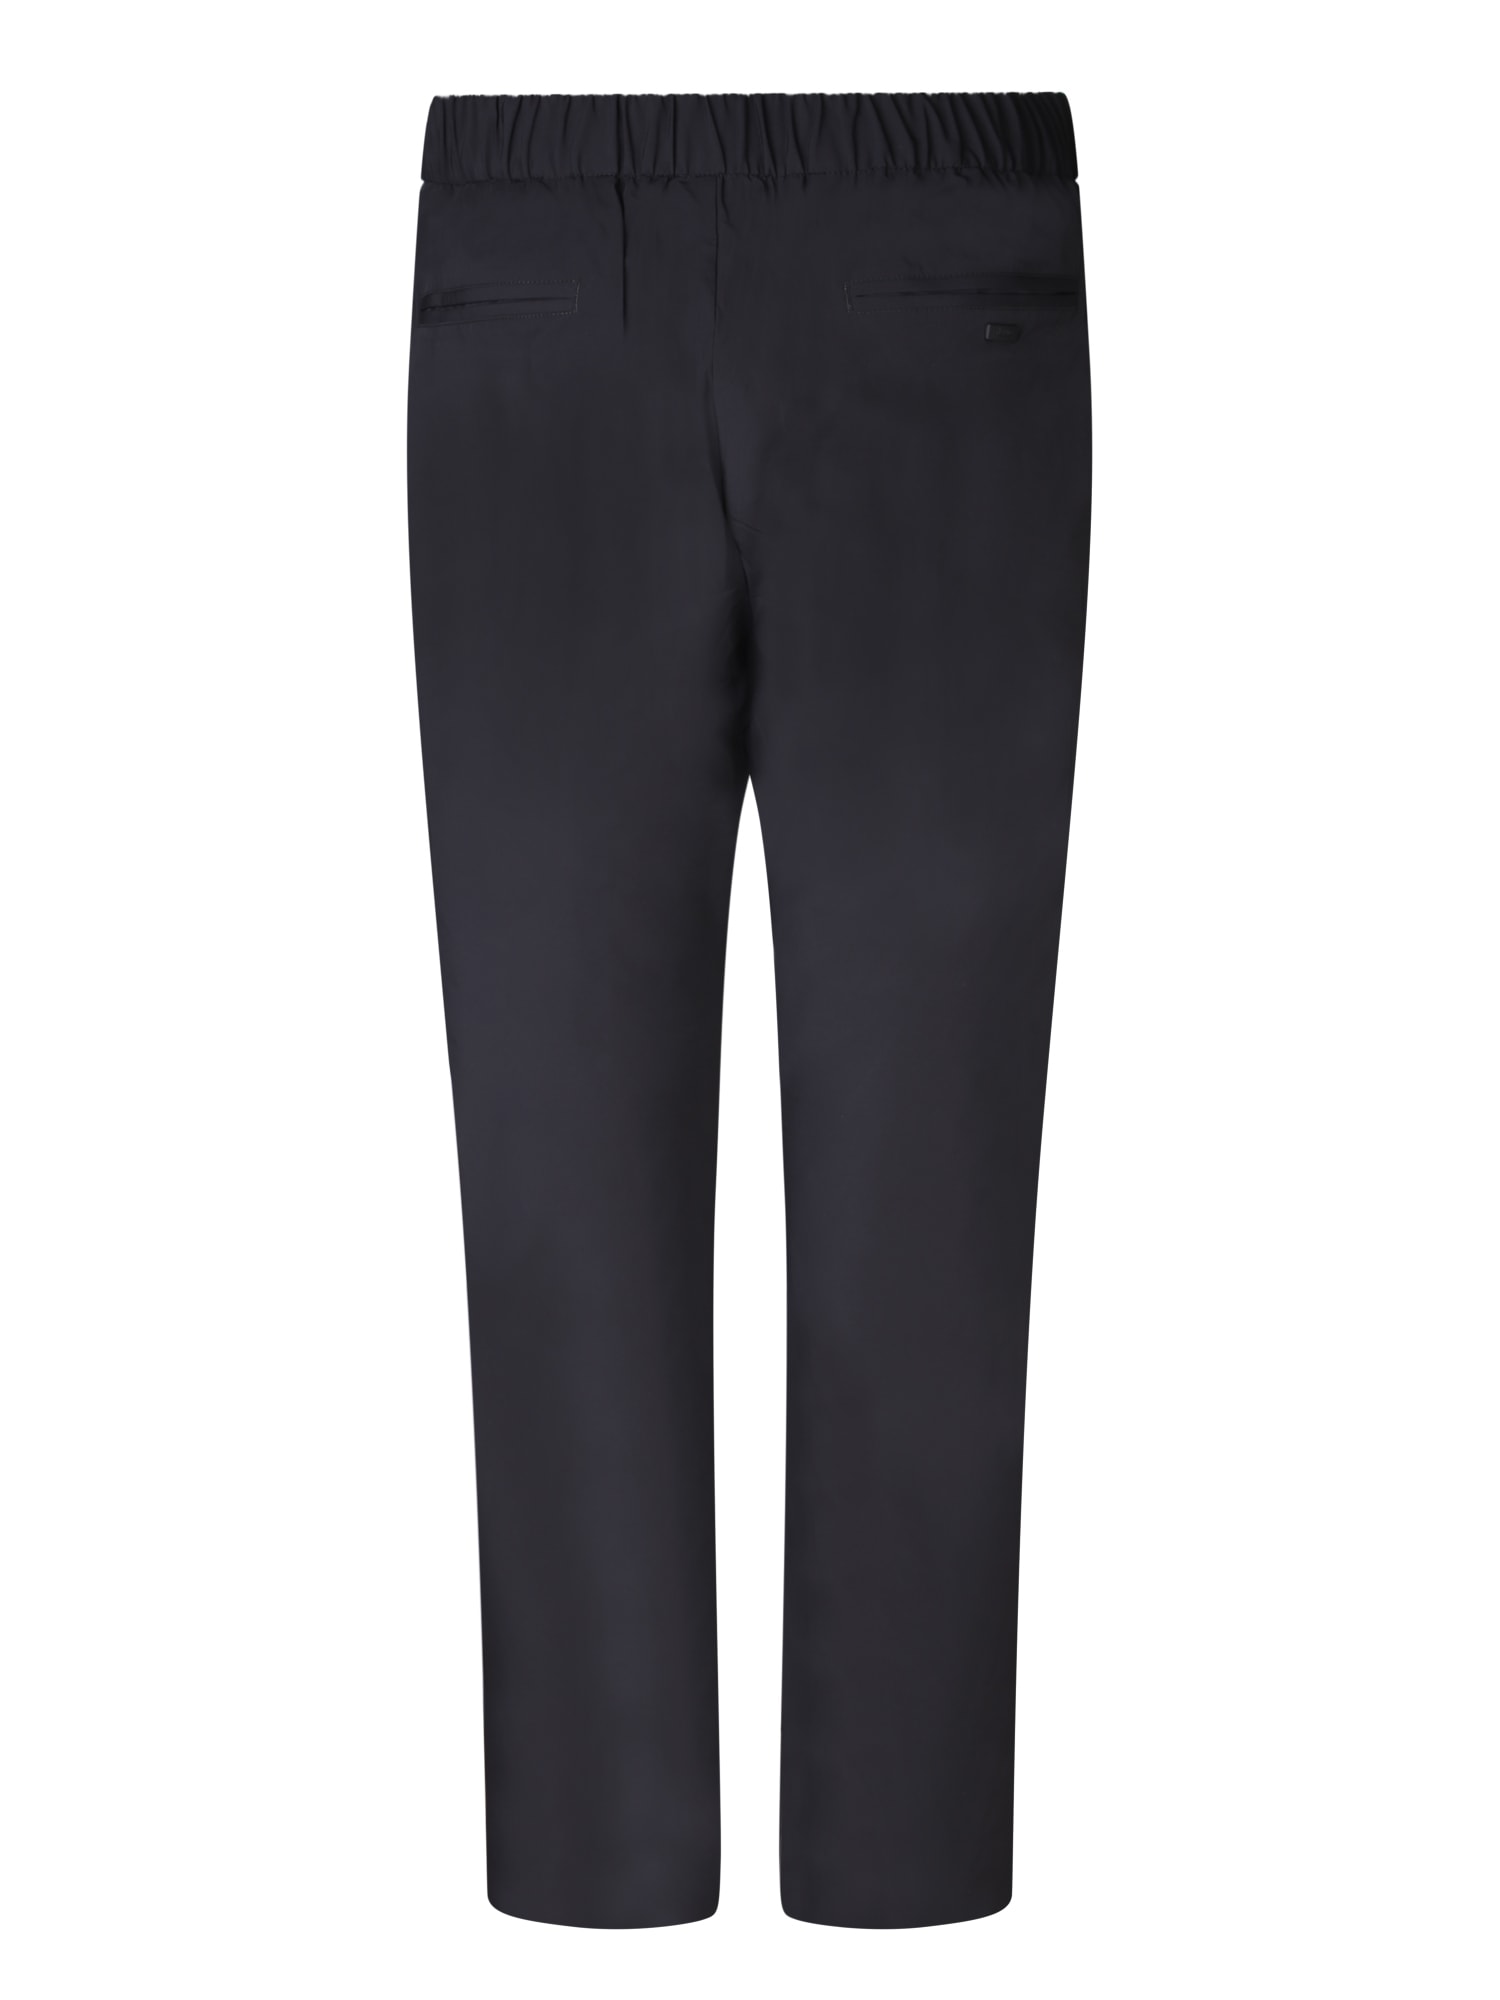 Shop Herno Nyl Black Trousers